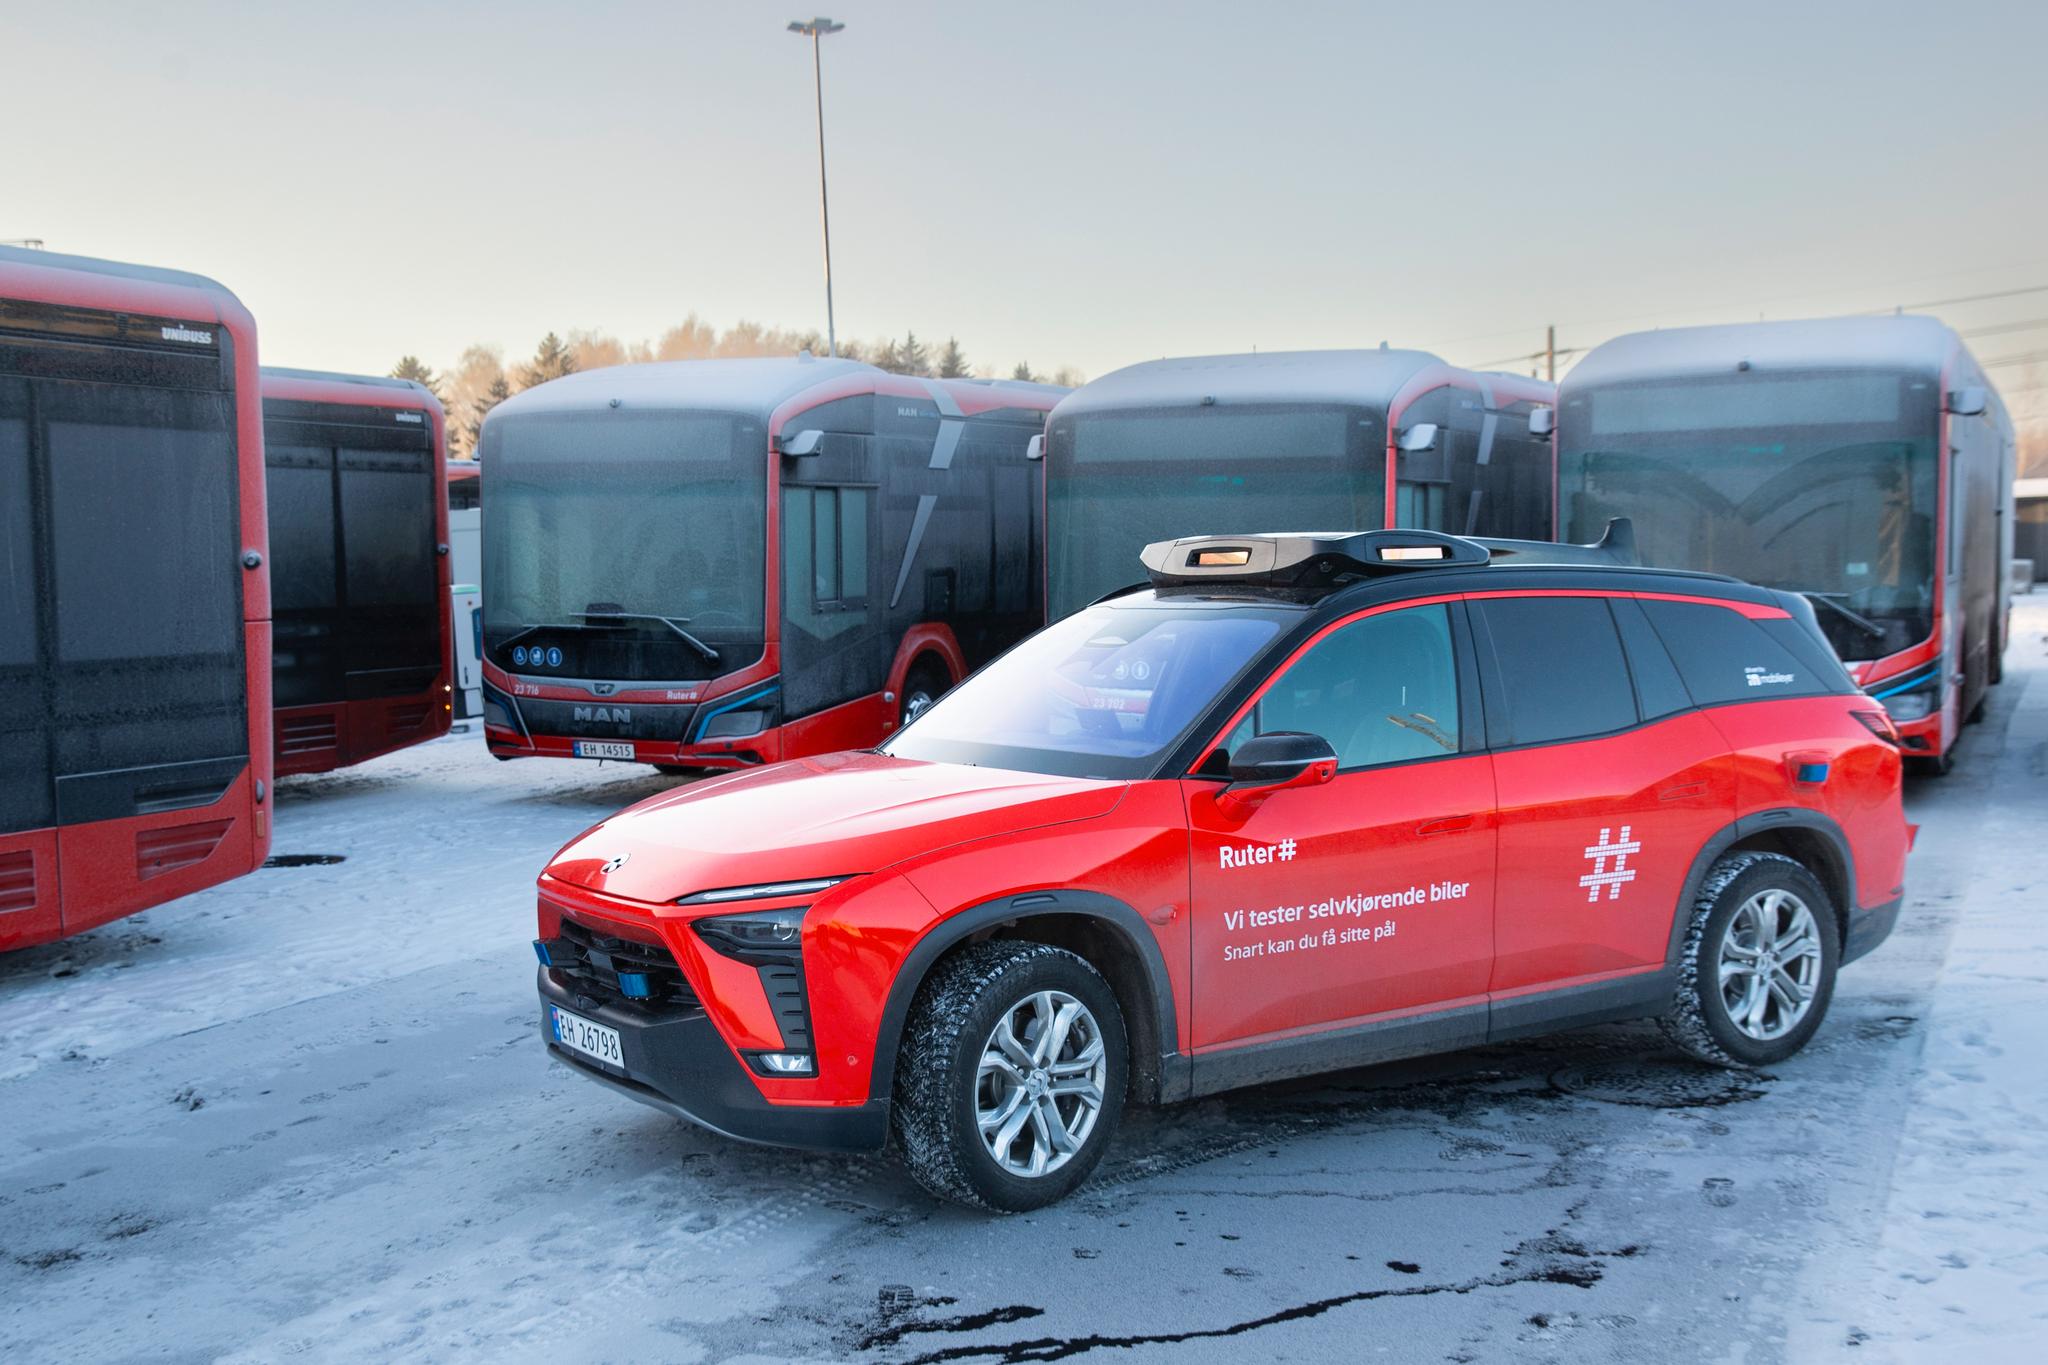 Oslo is testing new public transport services.  Soon, 15 self-driving cars will arrive in Grorodalen.